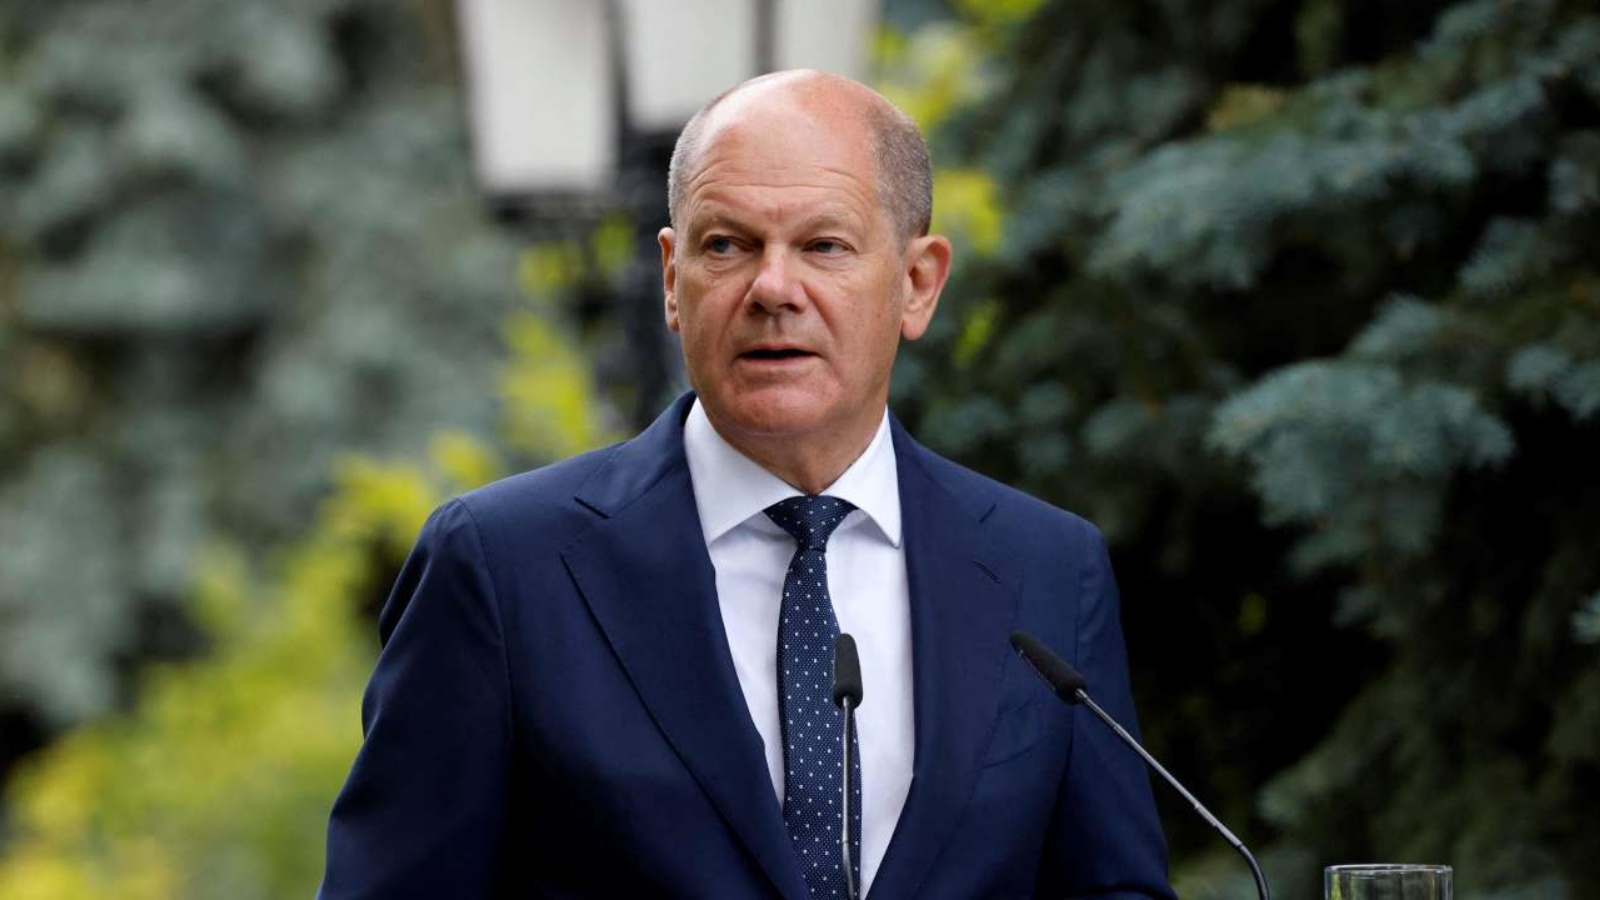 Olaf Scholz si oppone alla pace imposta in Ucraina